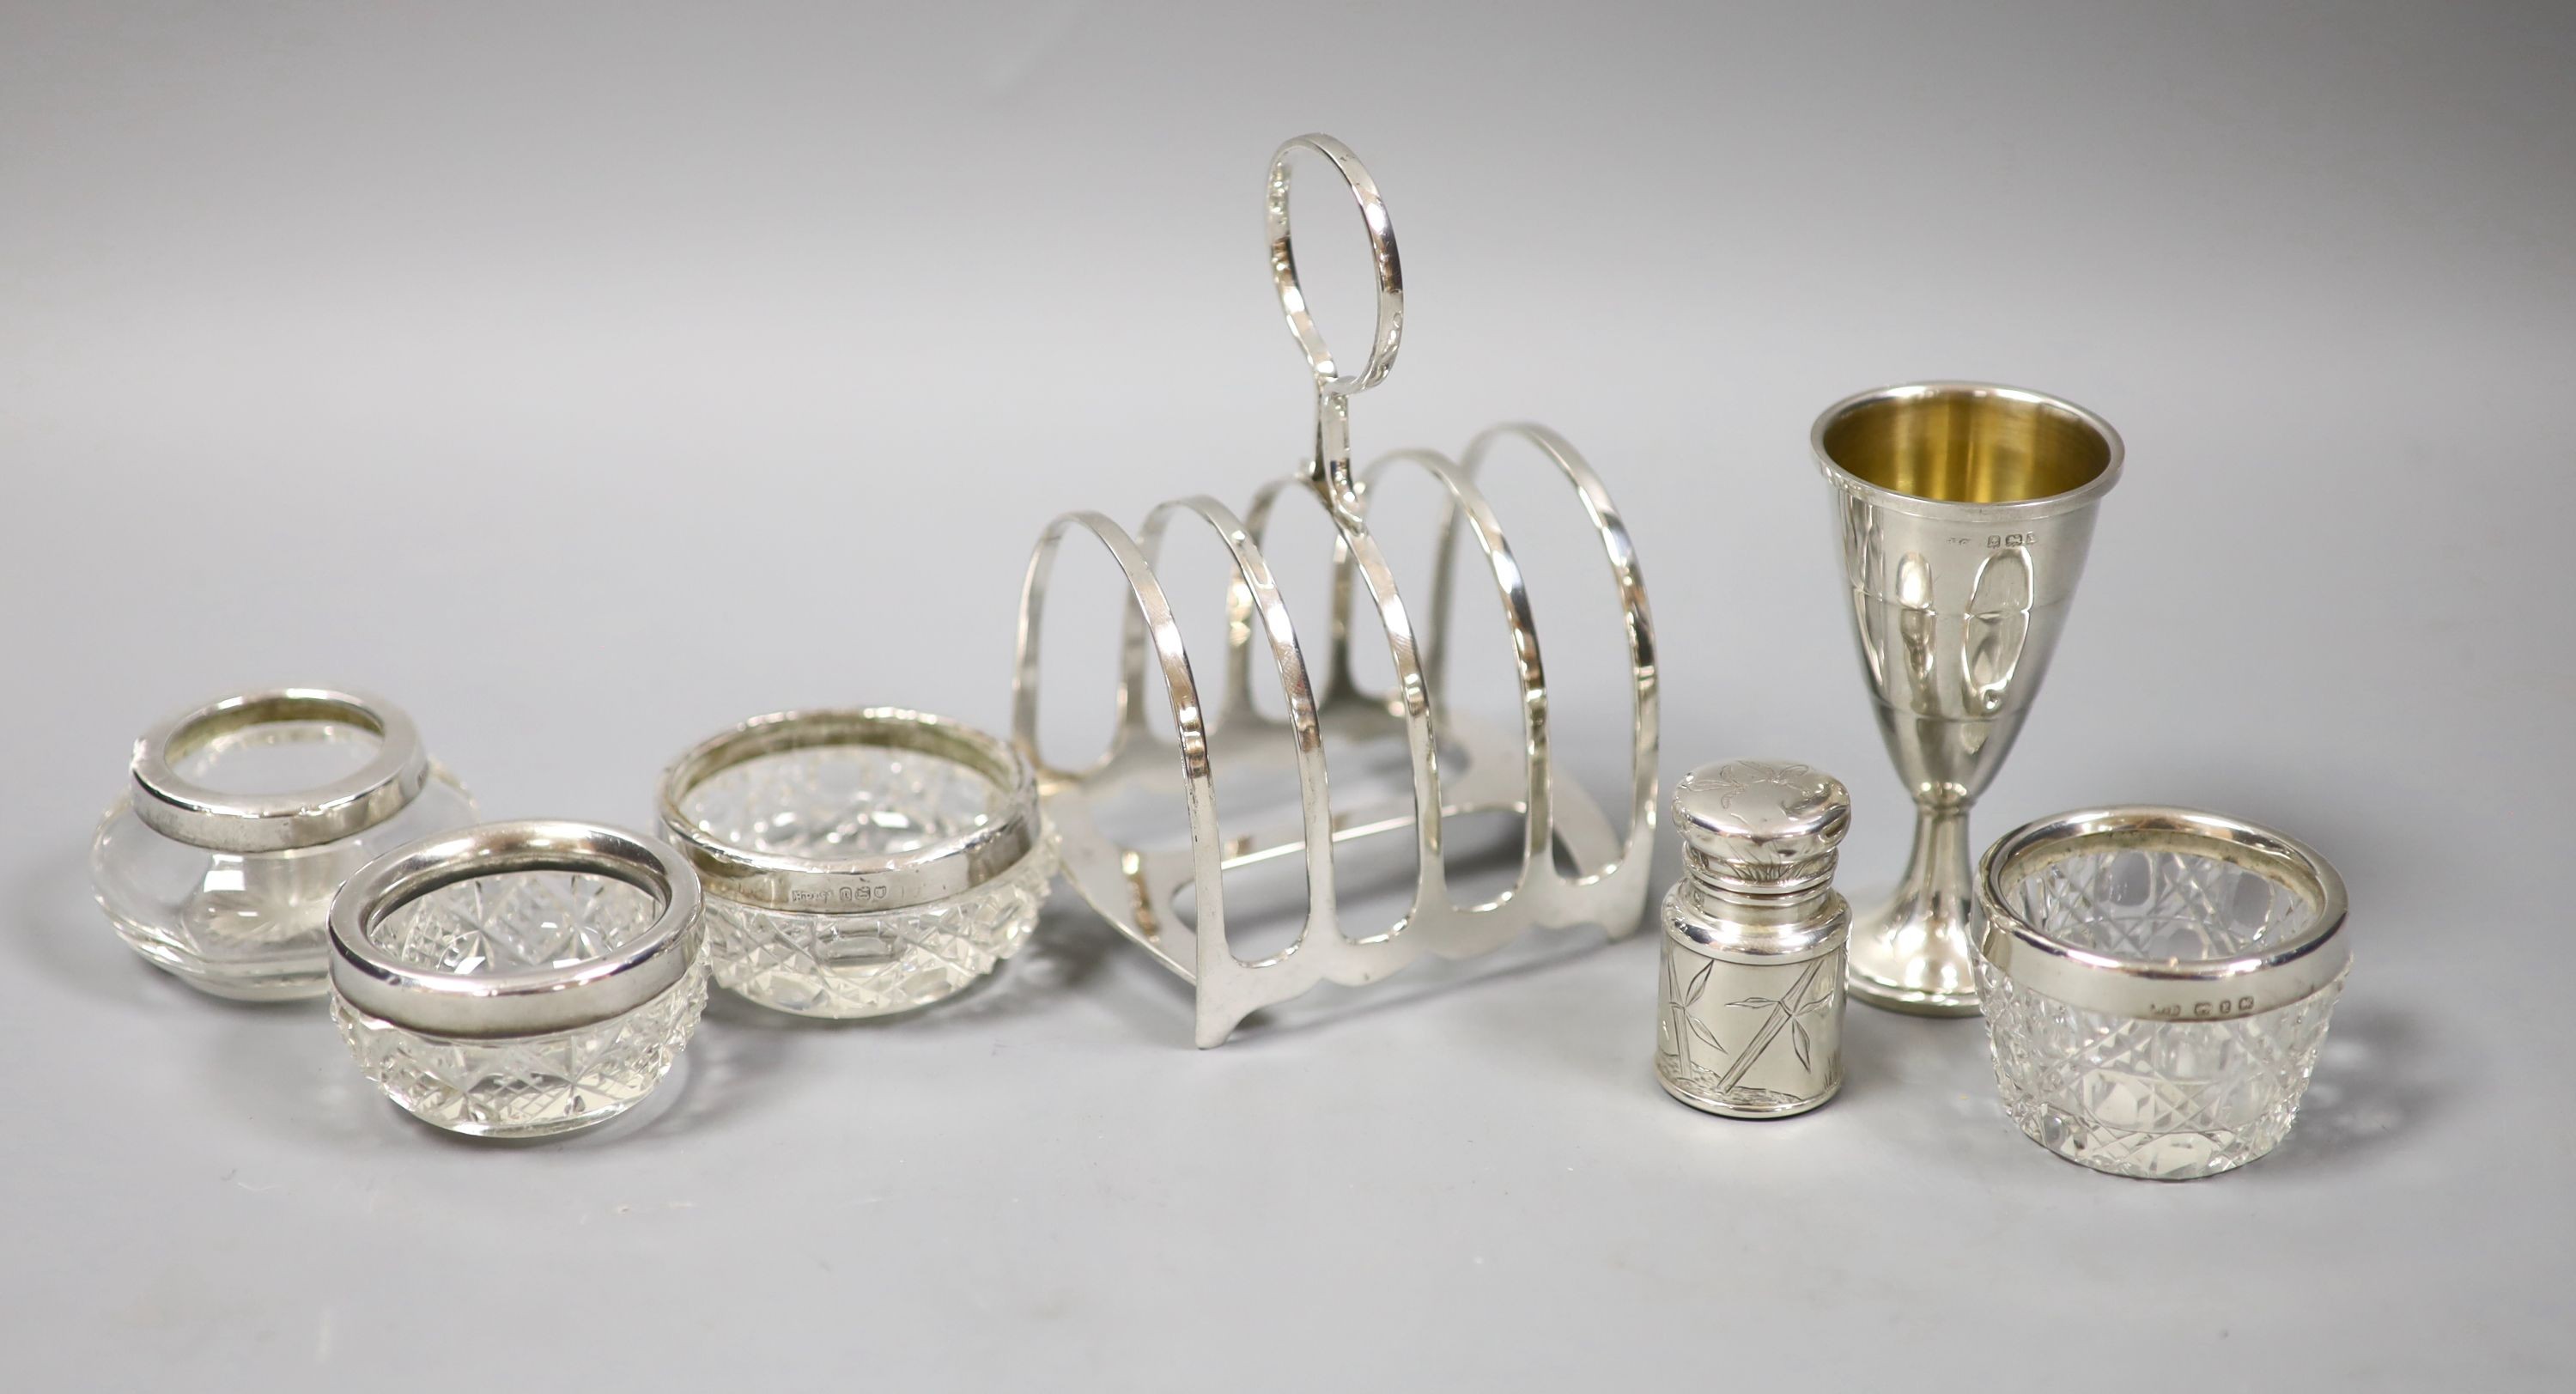 A silver toastrack, four silver mounted glass jars, a small silver goblet, and a Victorian silver scent bottle, London, 1883, 44mm.